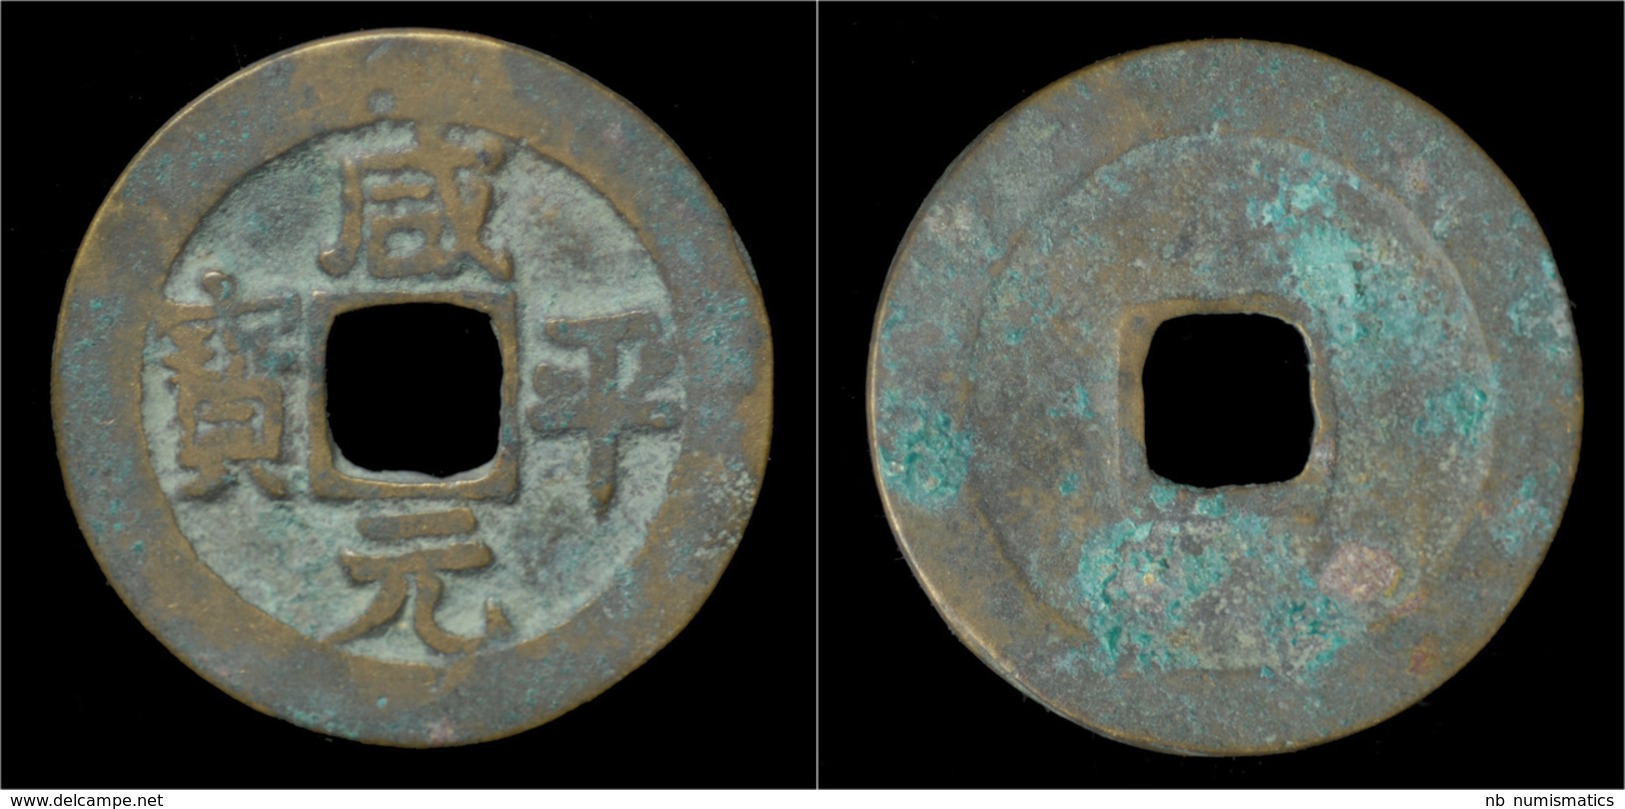 China Northern Song Dynasty AE 1-cash - Orientales